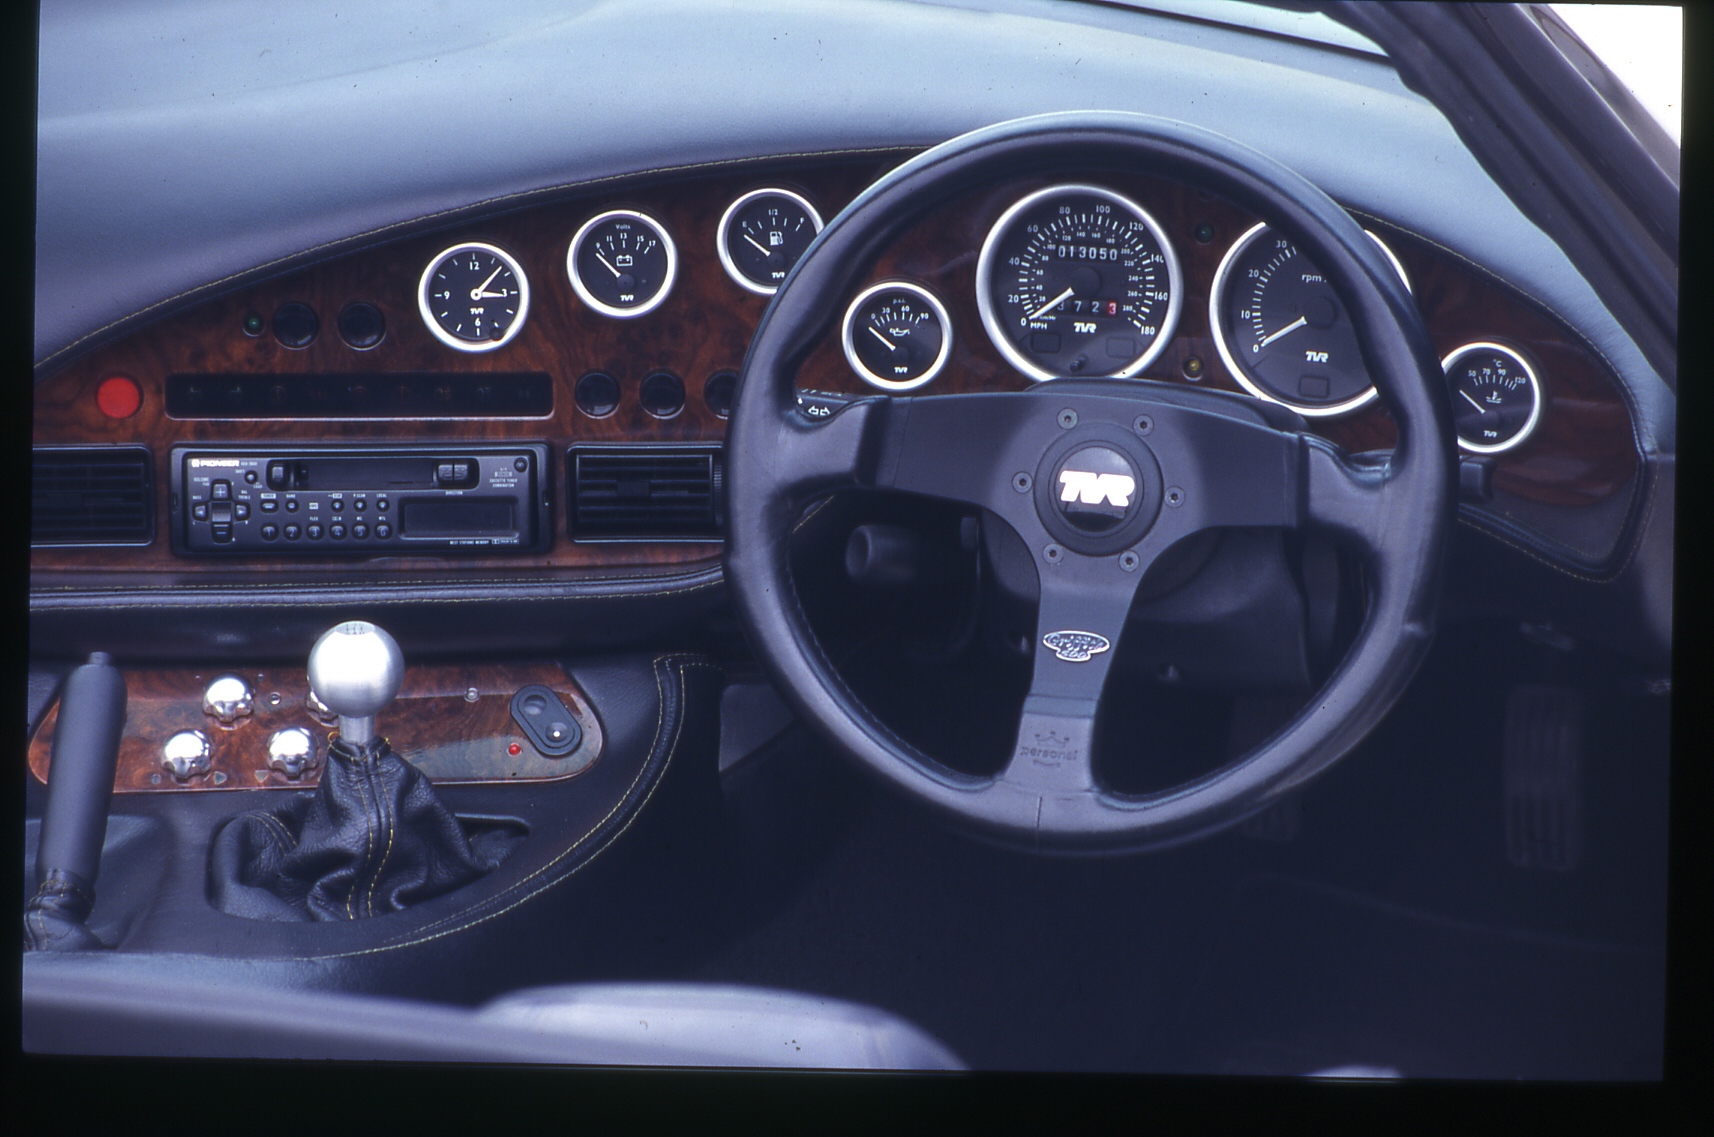 TVR, TVR Griffith, Griffith buying guide, Griffith interior